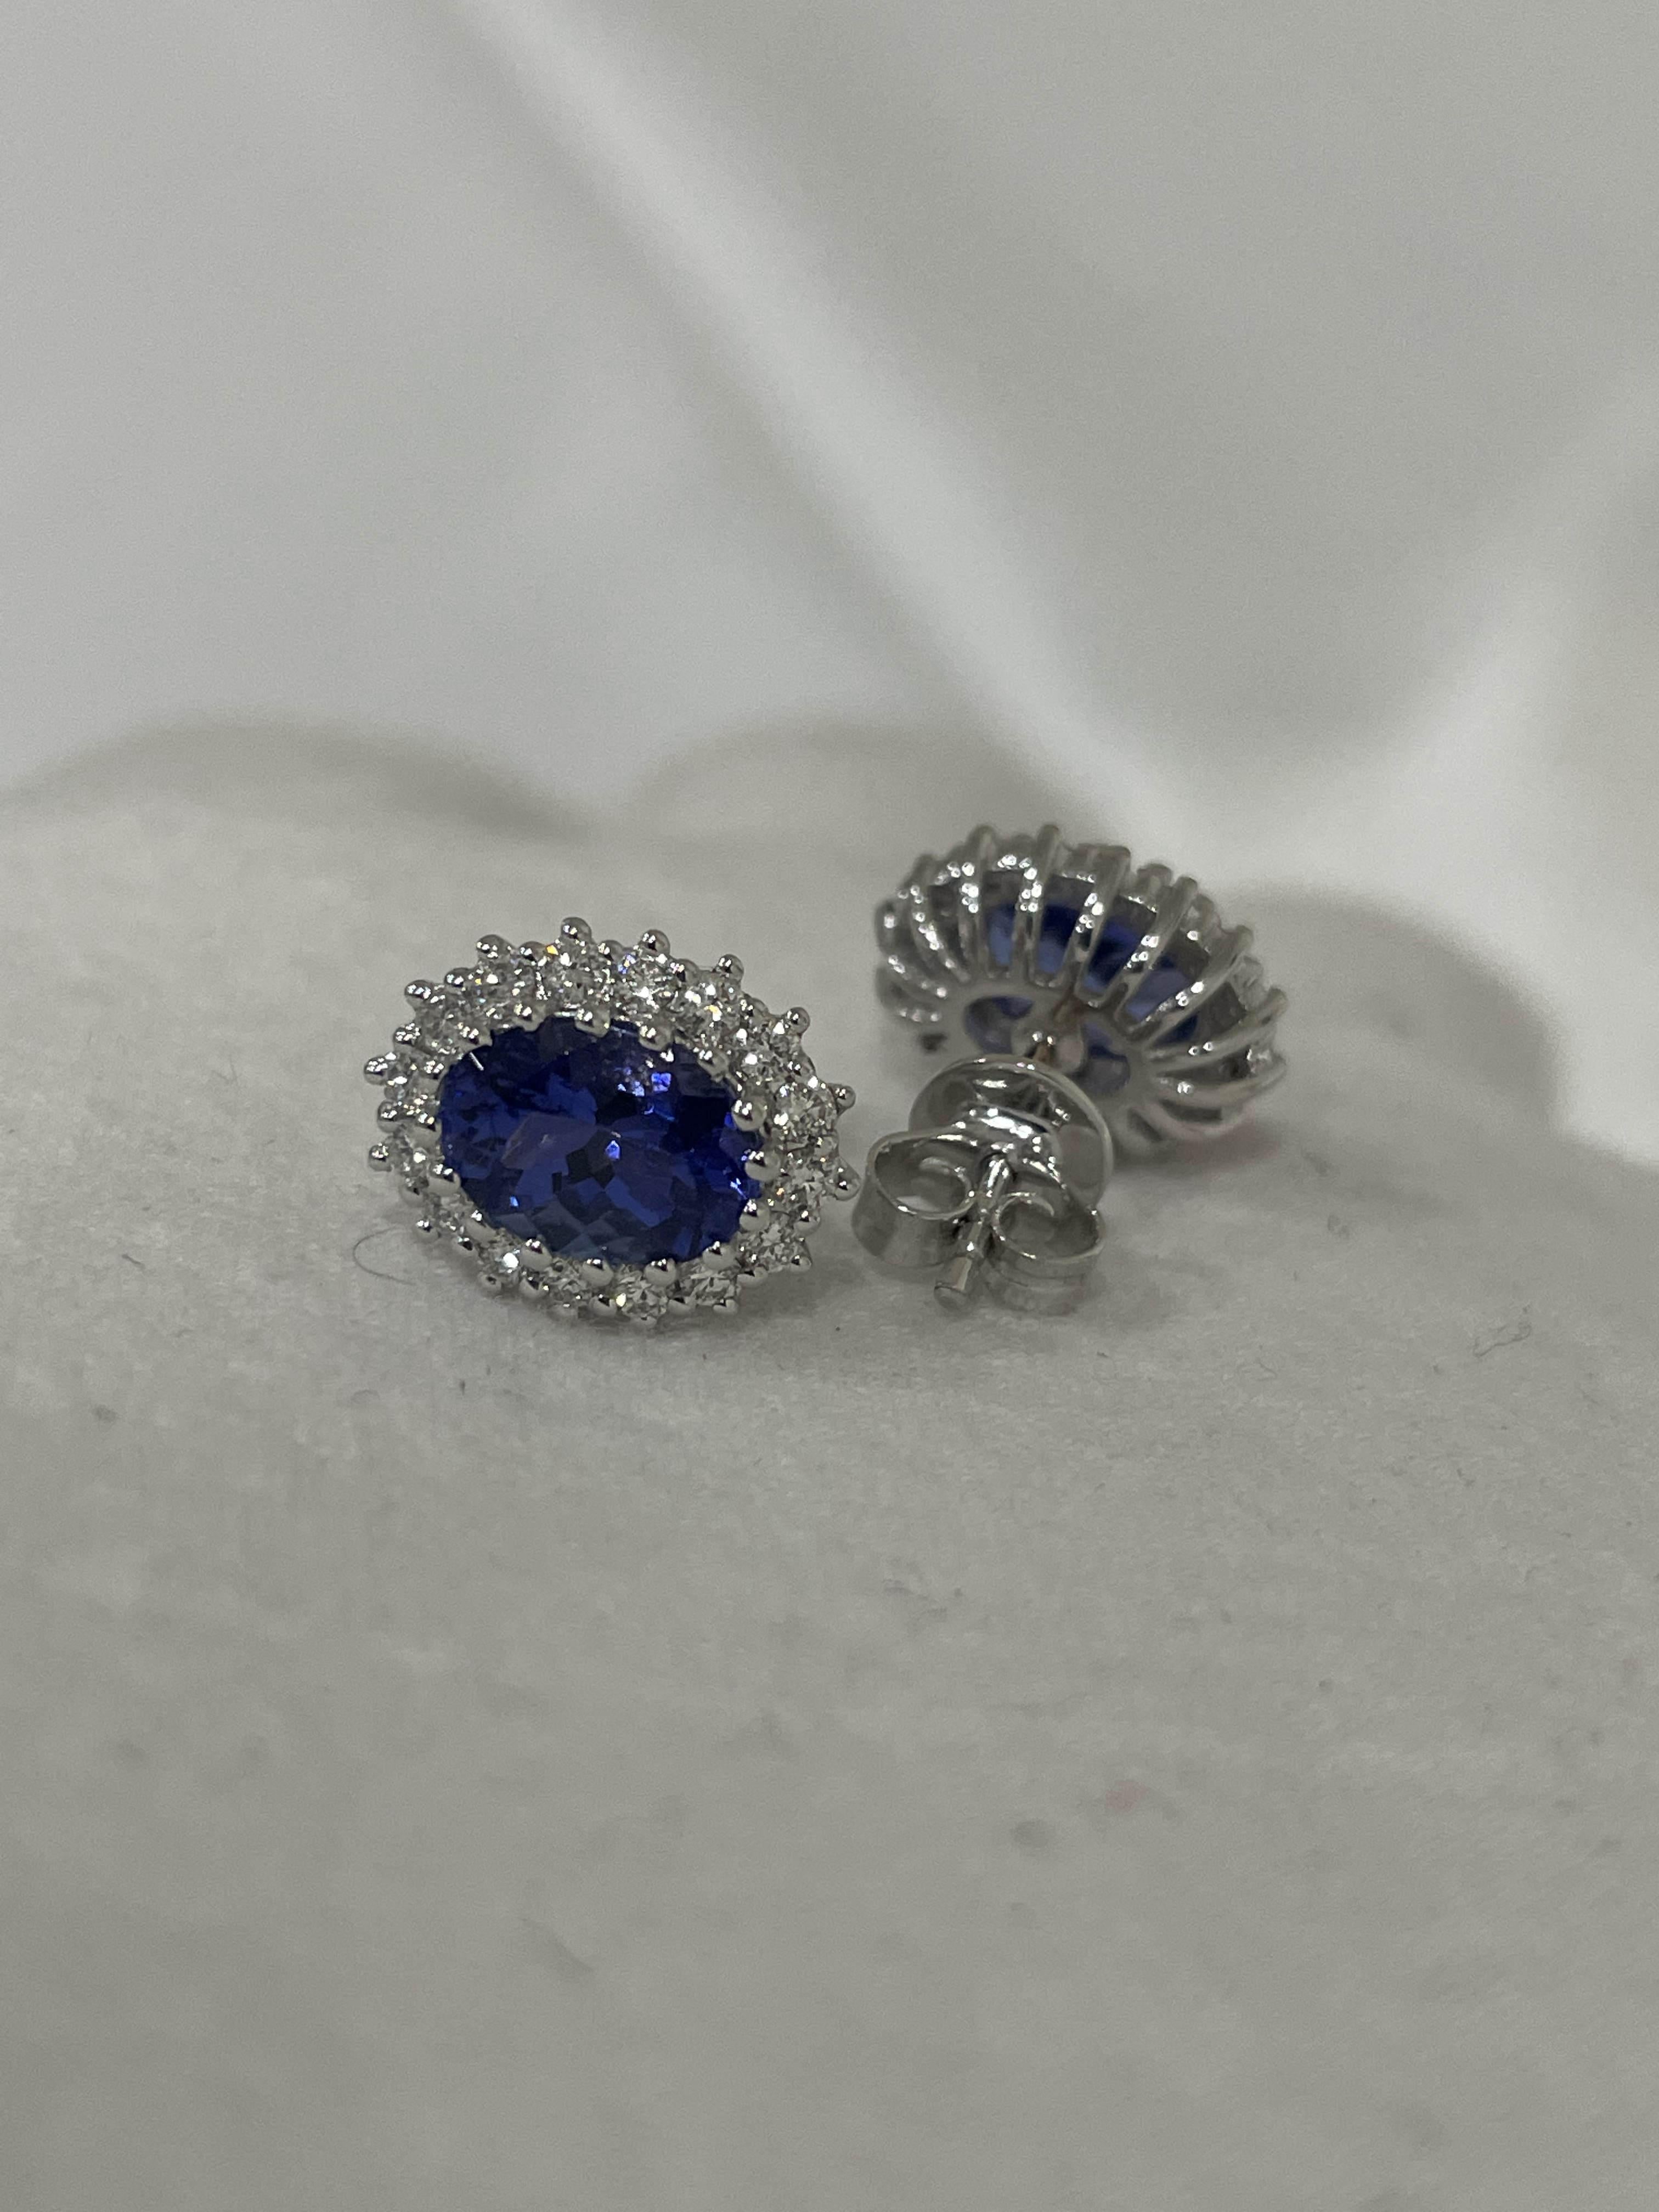 Oval Cut 2.45 Carat Oval Shaped Tanzanite Stud Earrings in 18K White Gold with Diamonds For Sale